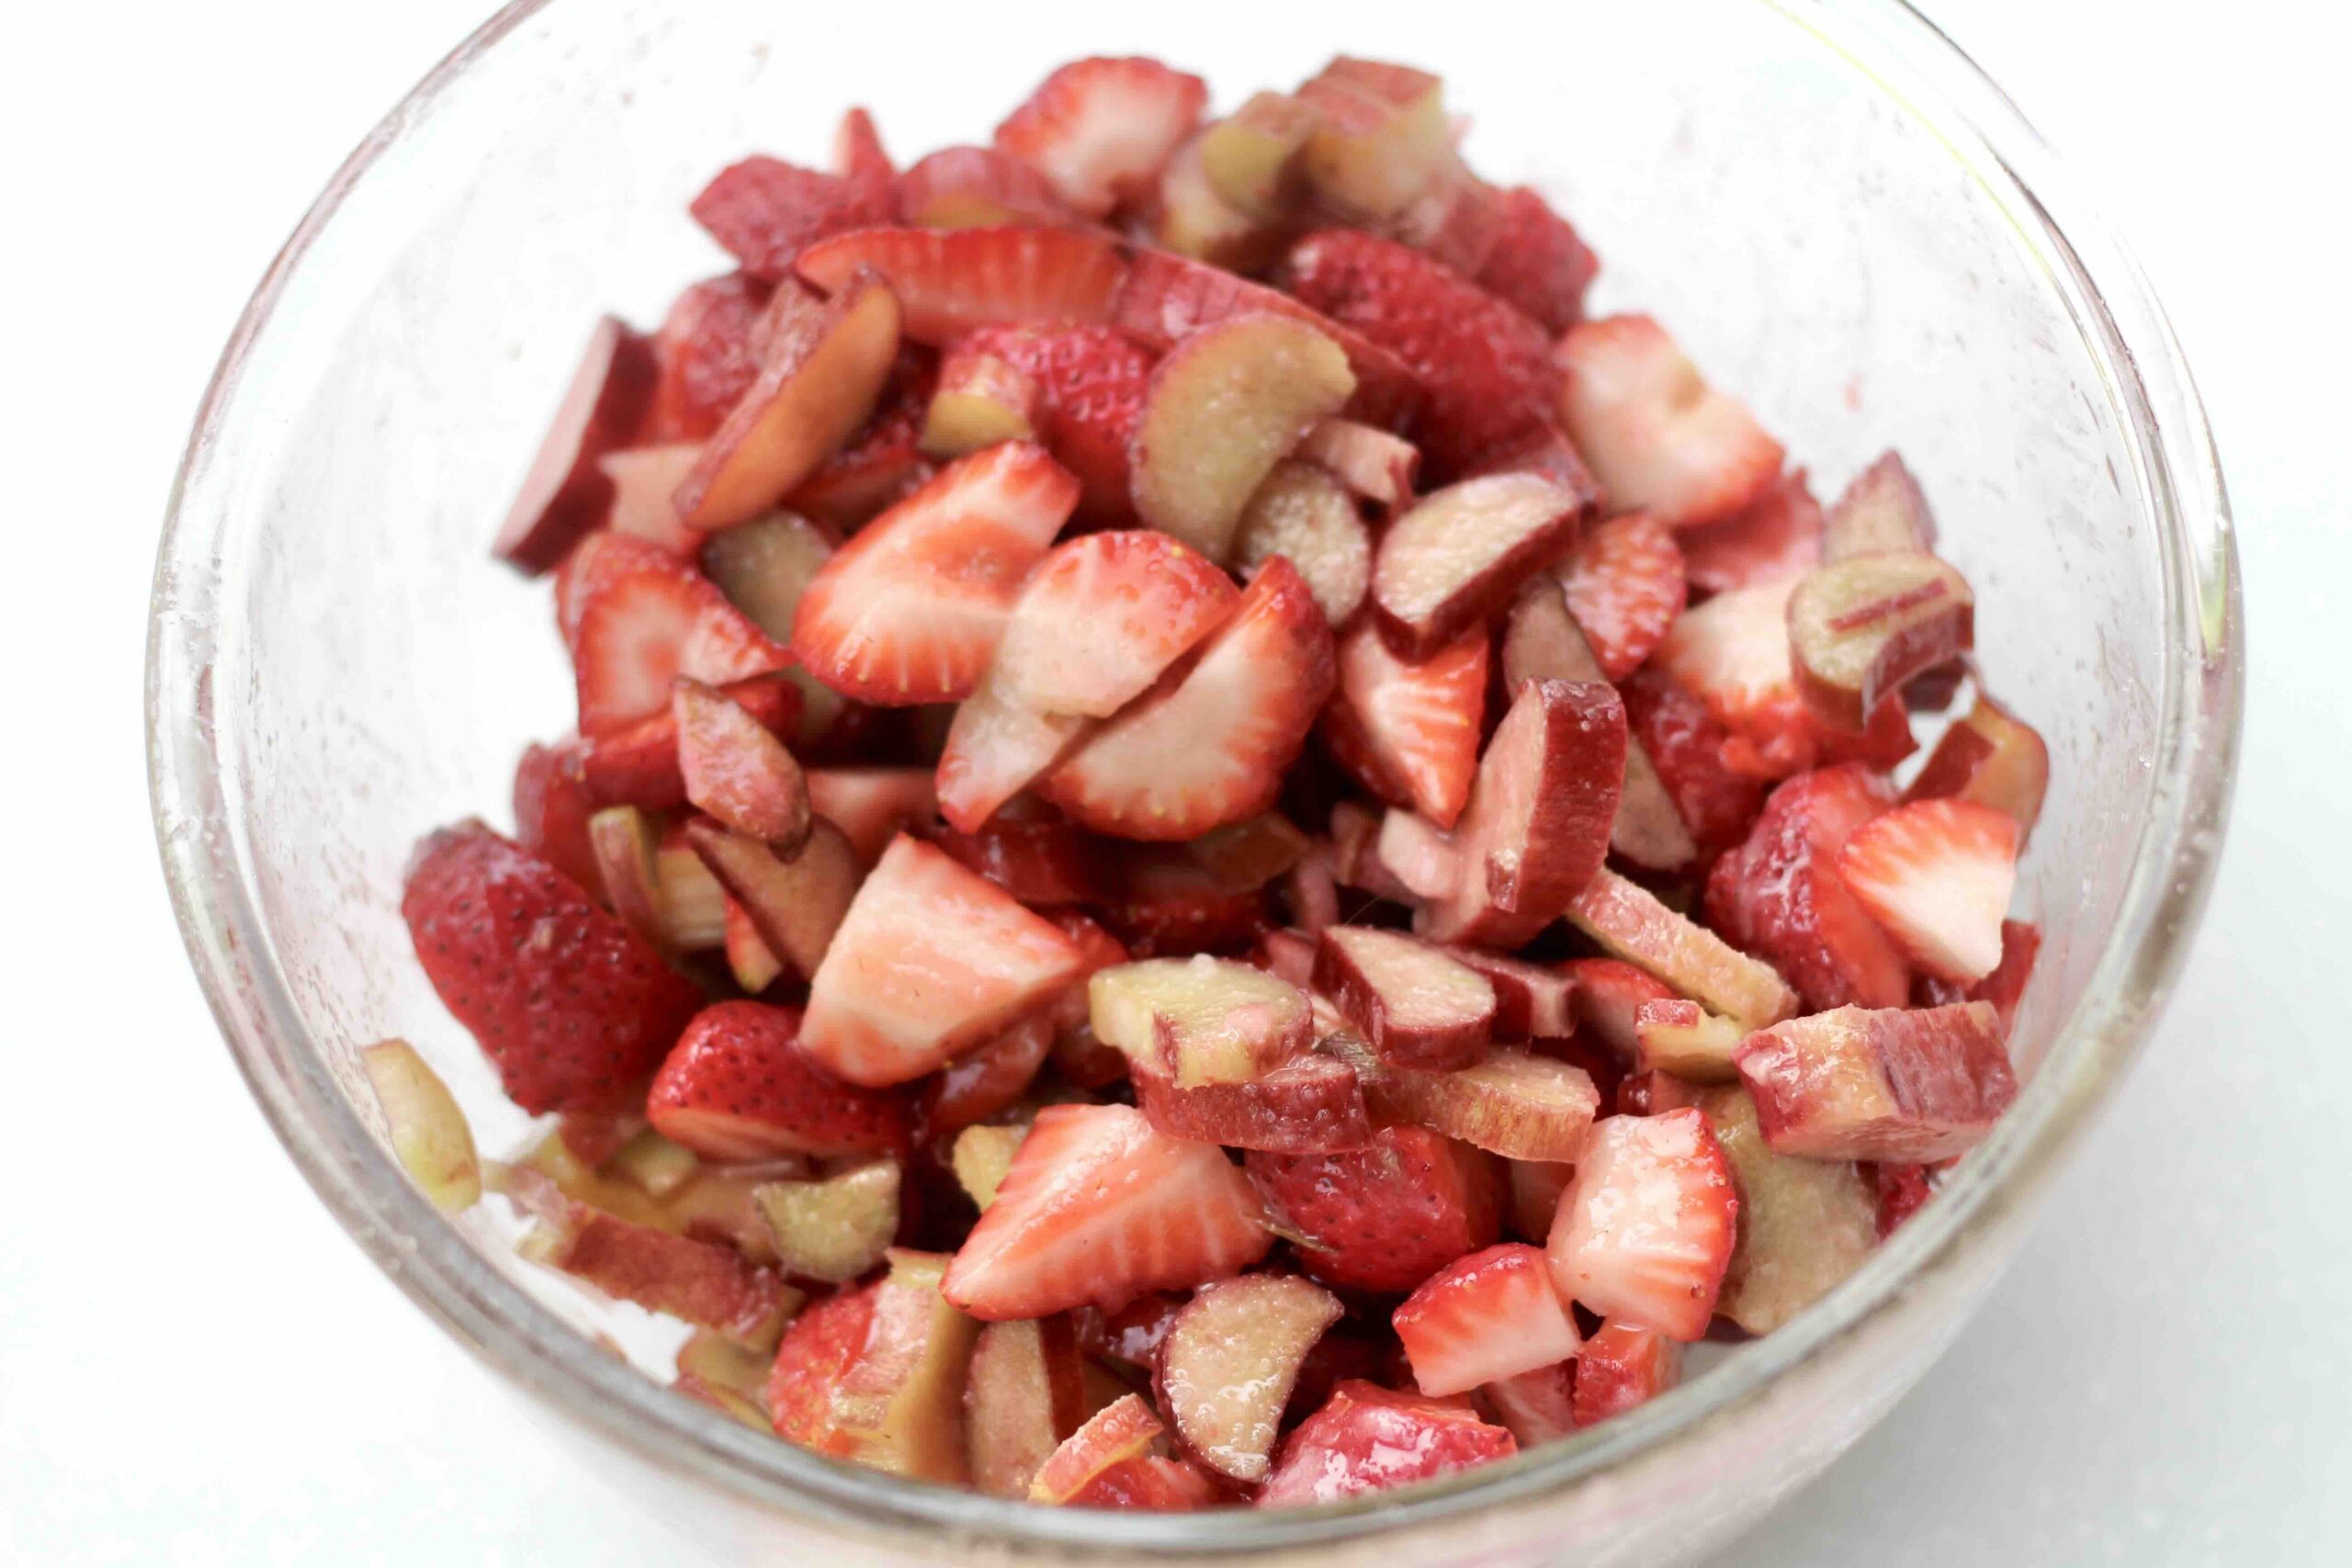 Strawberries and Rhubarb tossed in cornstarch and sugar